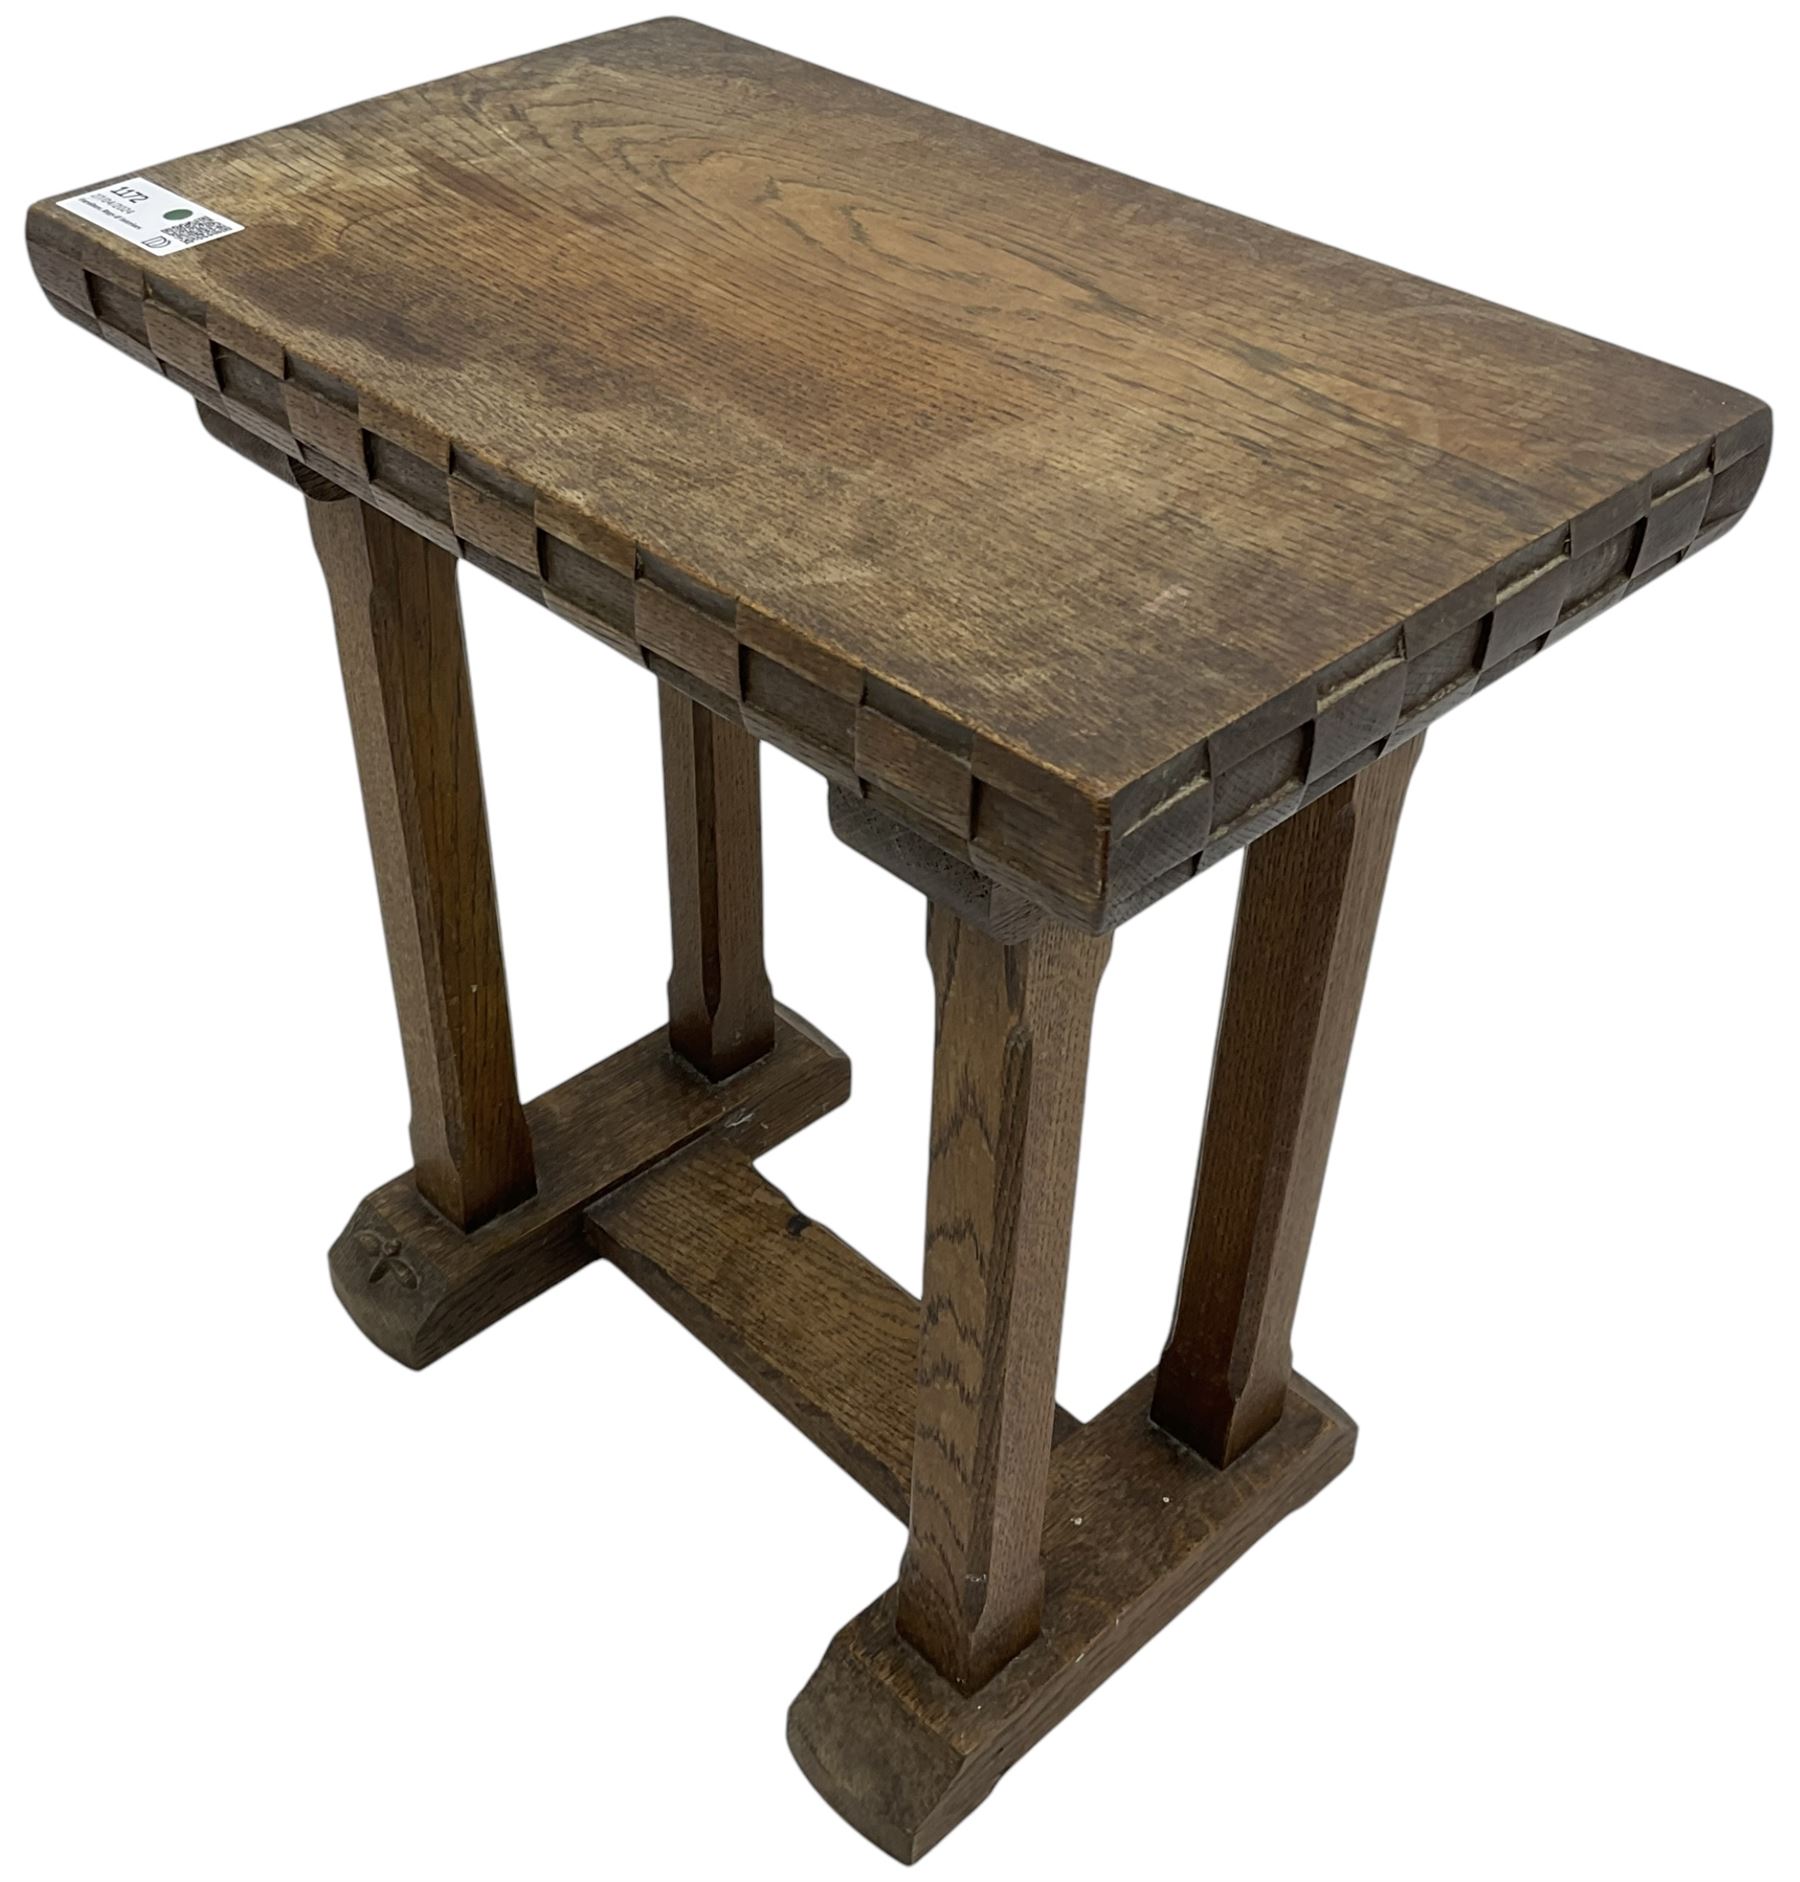 Yorkshire oak - small oak occasional table - Image 6 of 7